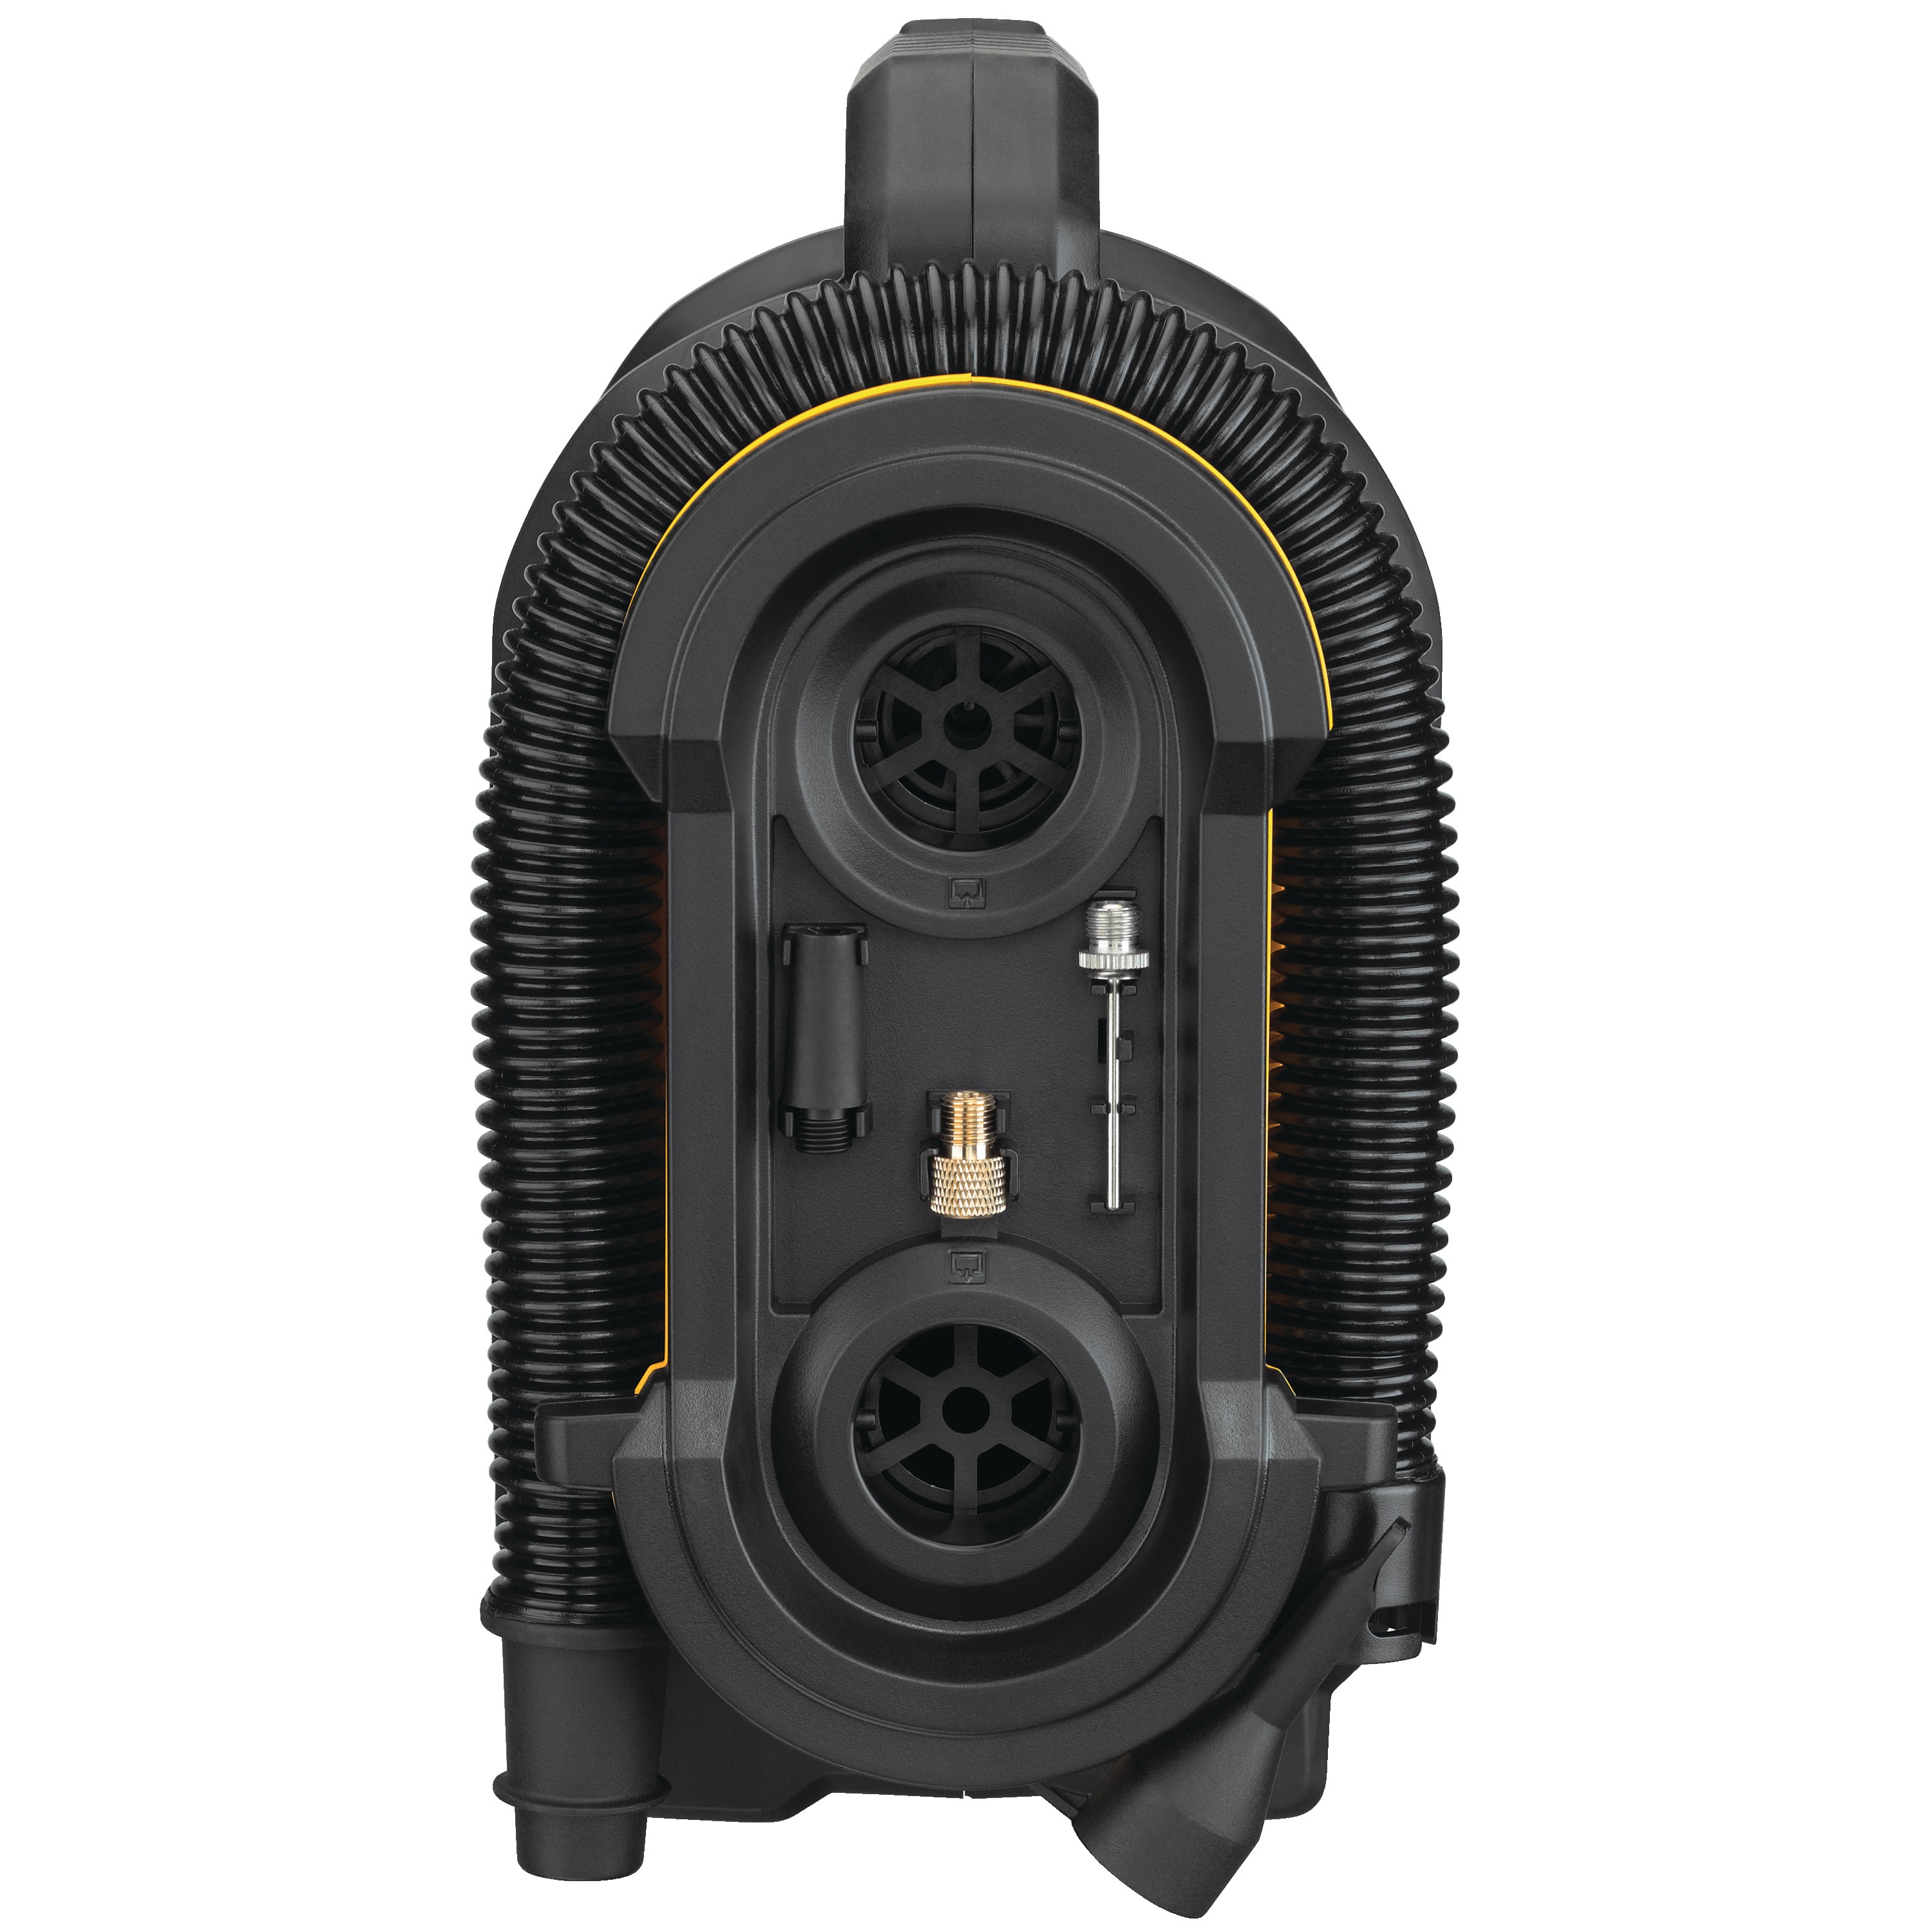 Profile of  Corded/Cordless Air Inflator with onboard accessories and high-volume inflator hose